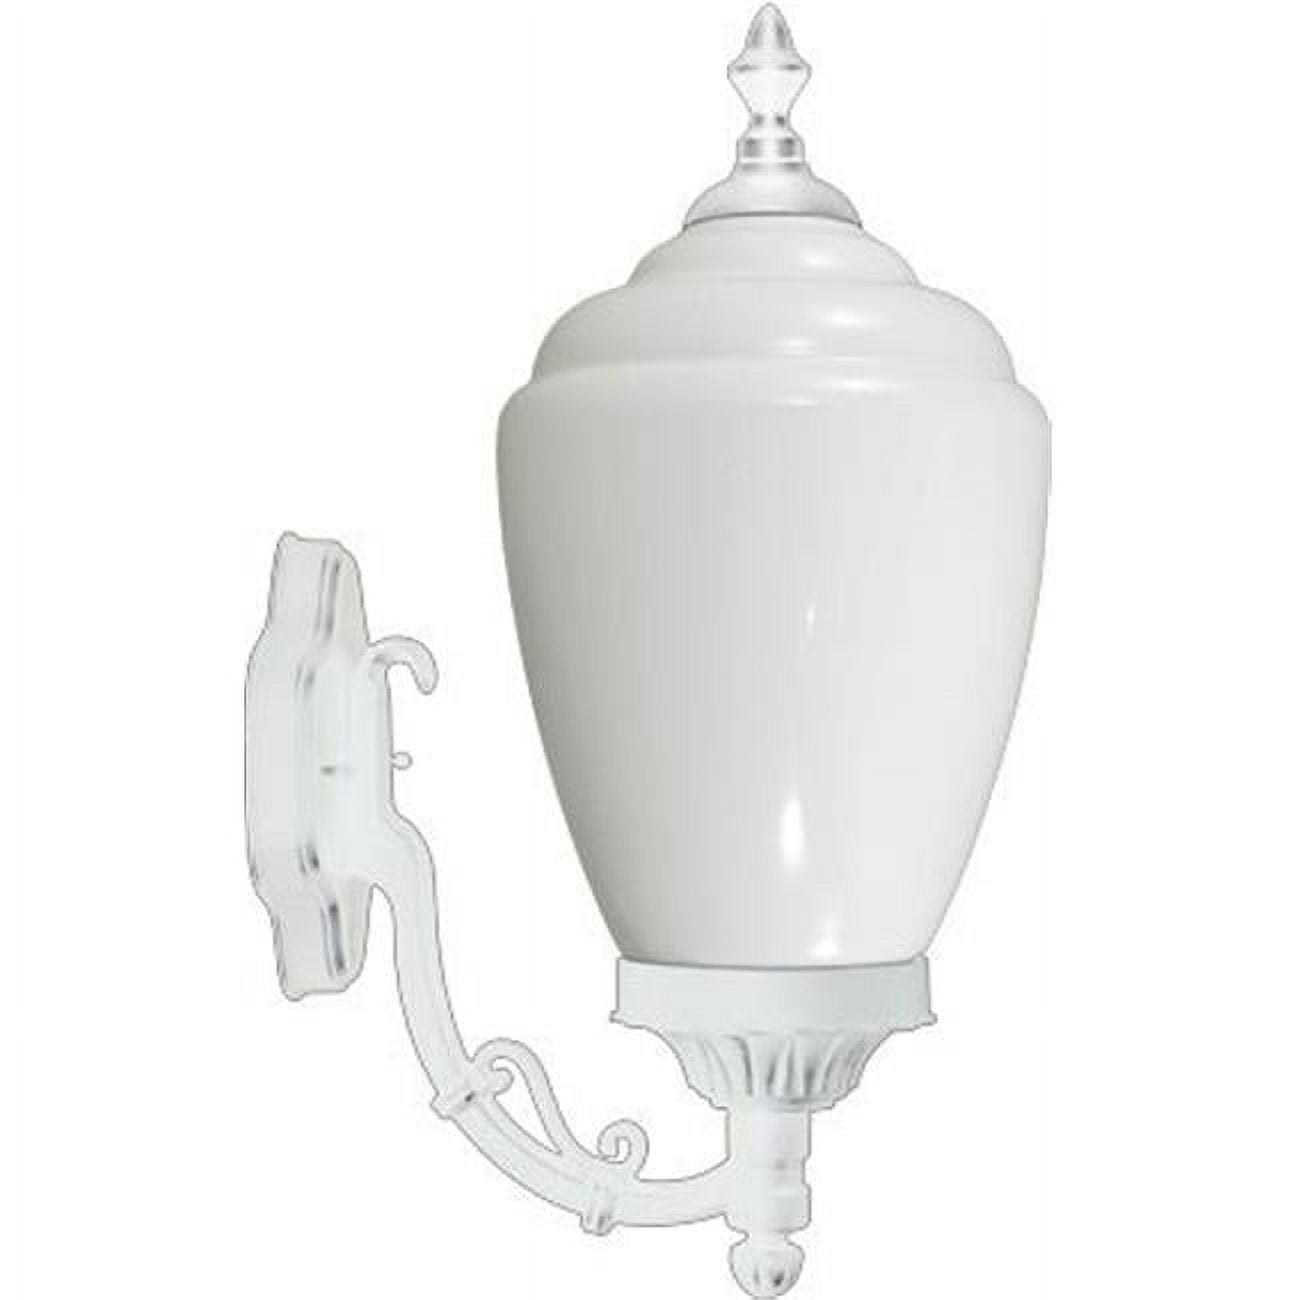 Picture of Dabmar Lighting GM290-W Powder Coated Cast Aluminum Wall Light Fixture, White - 19.25 x 8.75 x 11.63 in.